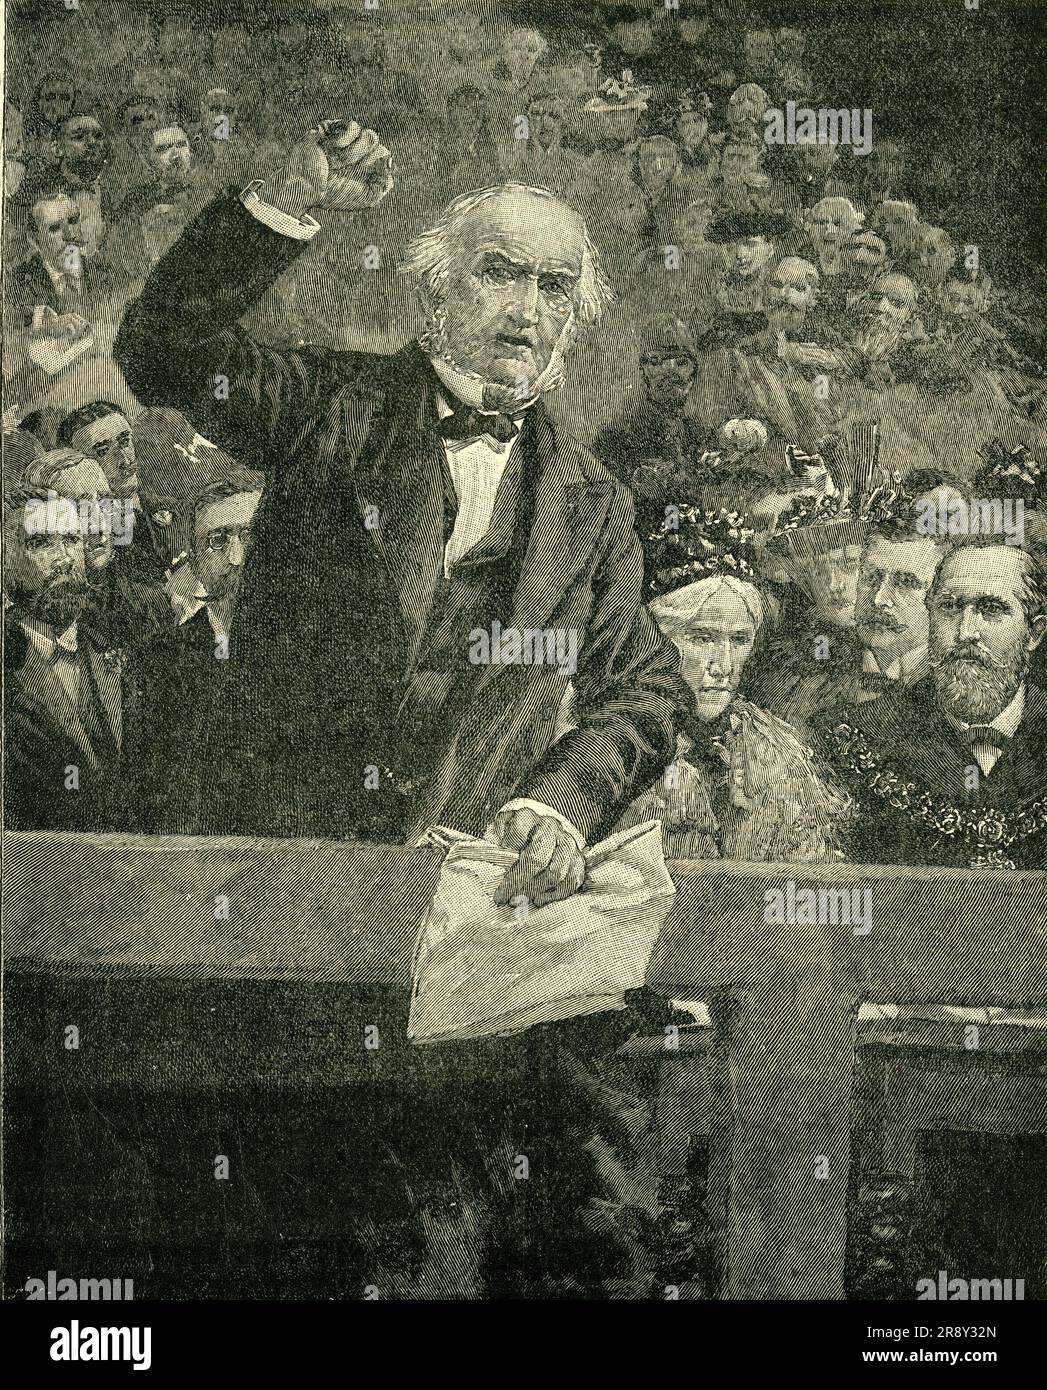 'The Armenian Atrocities: Mr. Gladstone Denouncing The Sultan at the Meeting in Liverpool', c1900. In 1896, in his last noteworthy speech, British politician William Gladstone denounced the 'Hamidian massacres', carried out by the Ottomans under Sultan Abdul Hamid II. From &quot;Cassell's History of England, Vol. IX&quot;. [Cassell and Company, Limited, London, Paris, New York &amp; Melbourne] Stock Photo